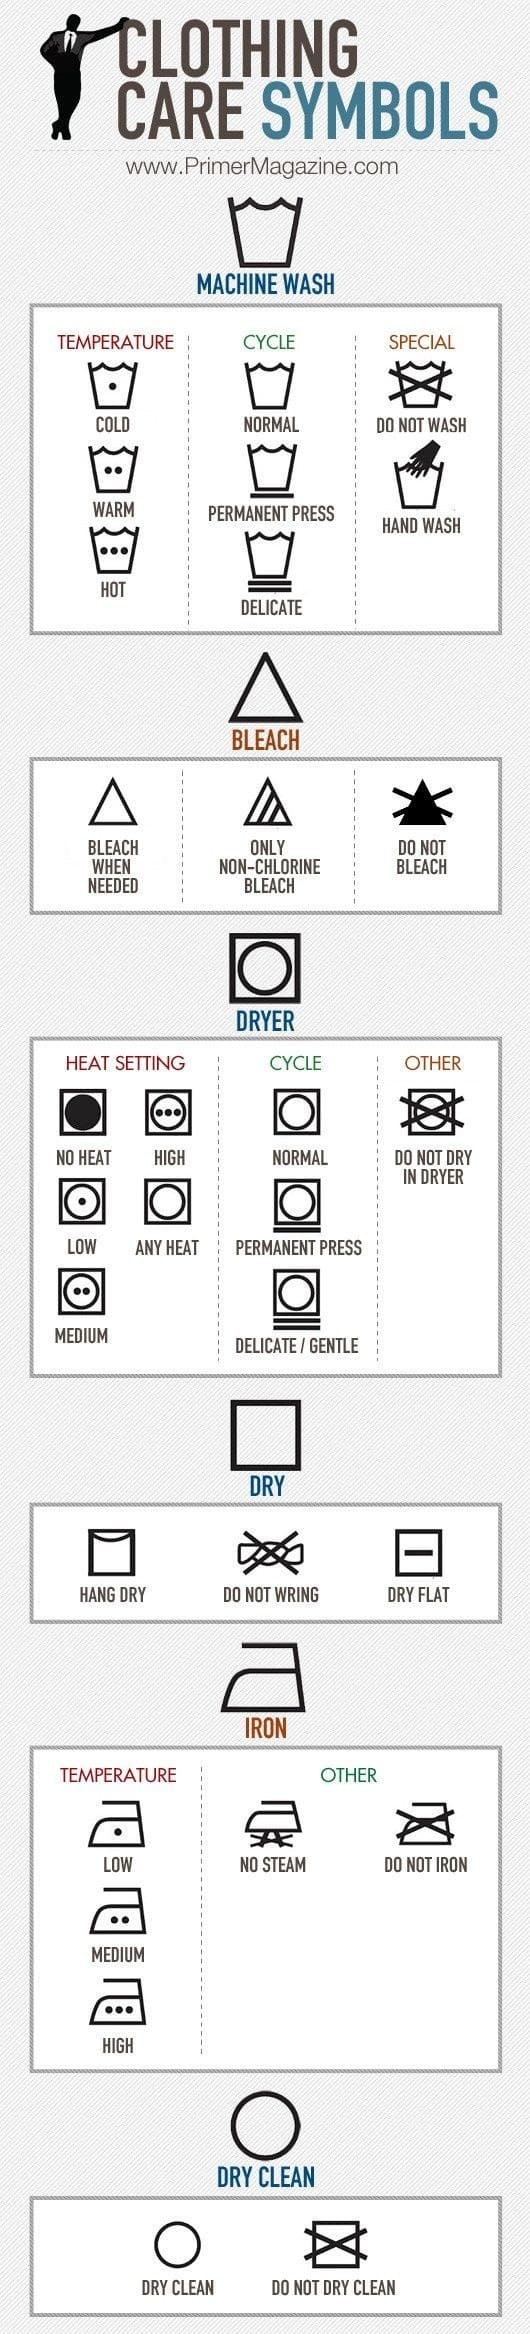 And finally, you're gonna wanna wash all your awesome swag (though you should definitely probably dry clean your suits and dress shirts). Here are what all those symbols on your clothes mean: